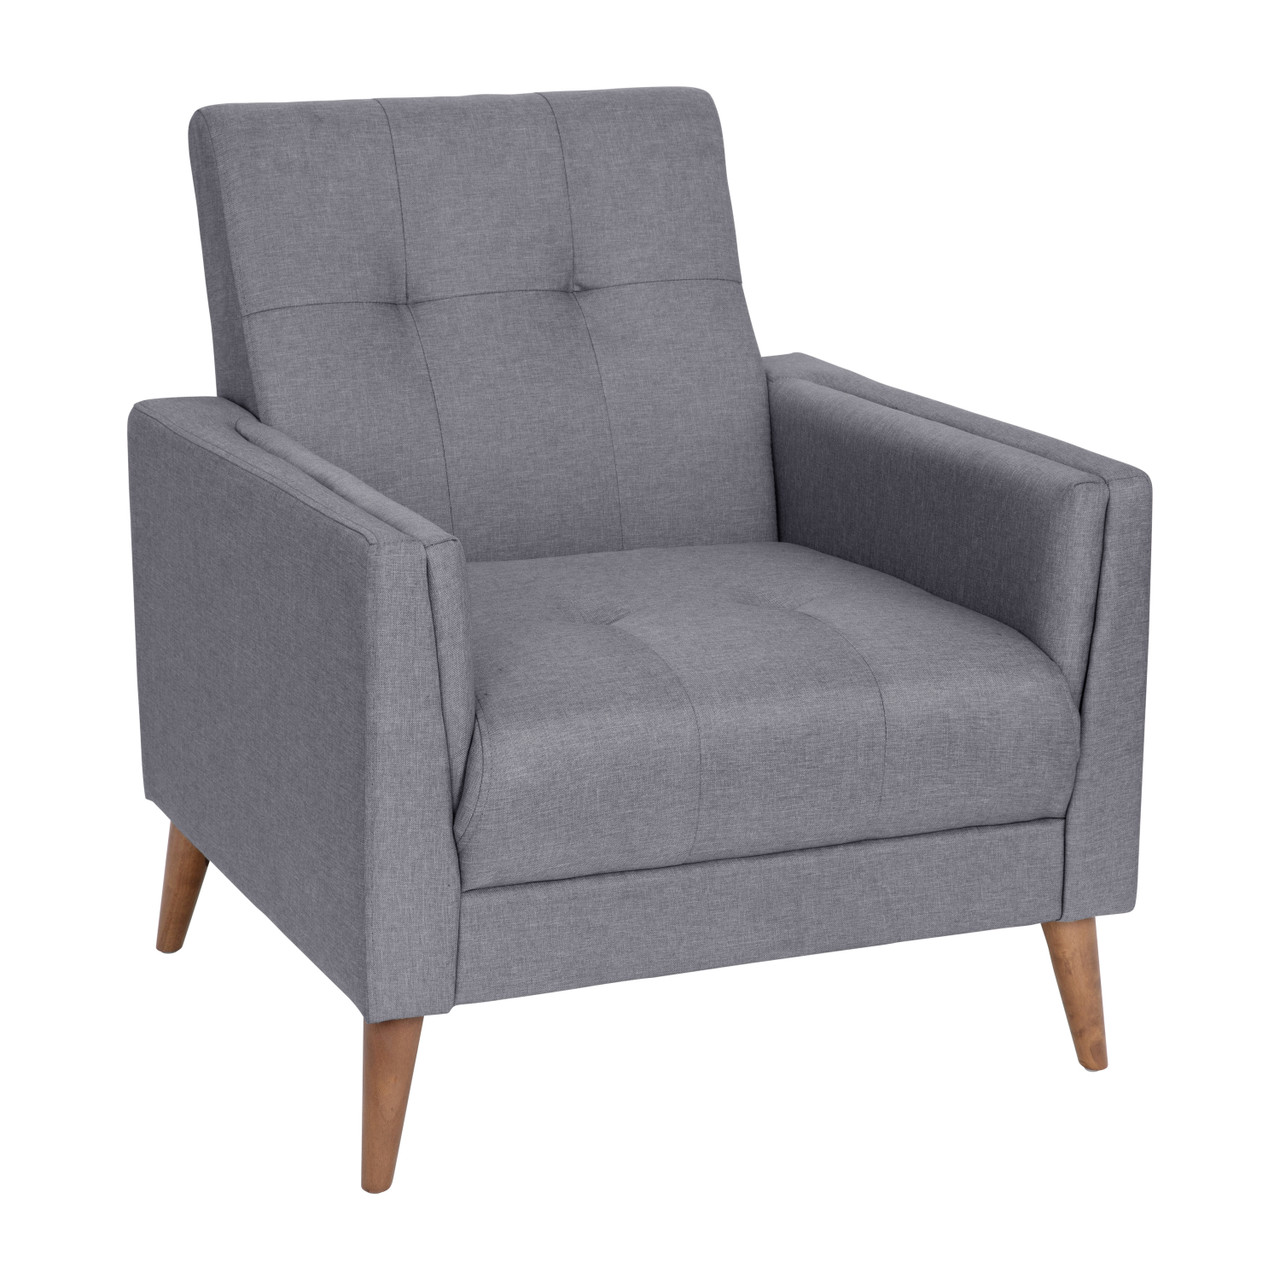 Flash Furniture Conrad Mid-Century Modern Commercial Grade Armchair w/ Tufted Faux Linen Upholstery & Solid Wood Legs in Slate Gray, Model#